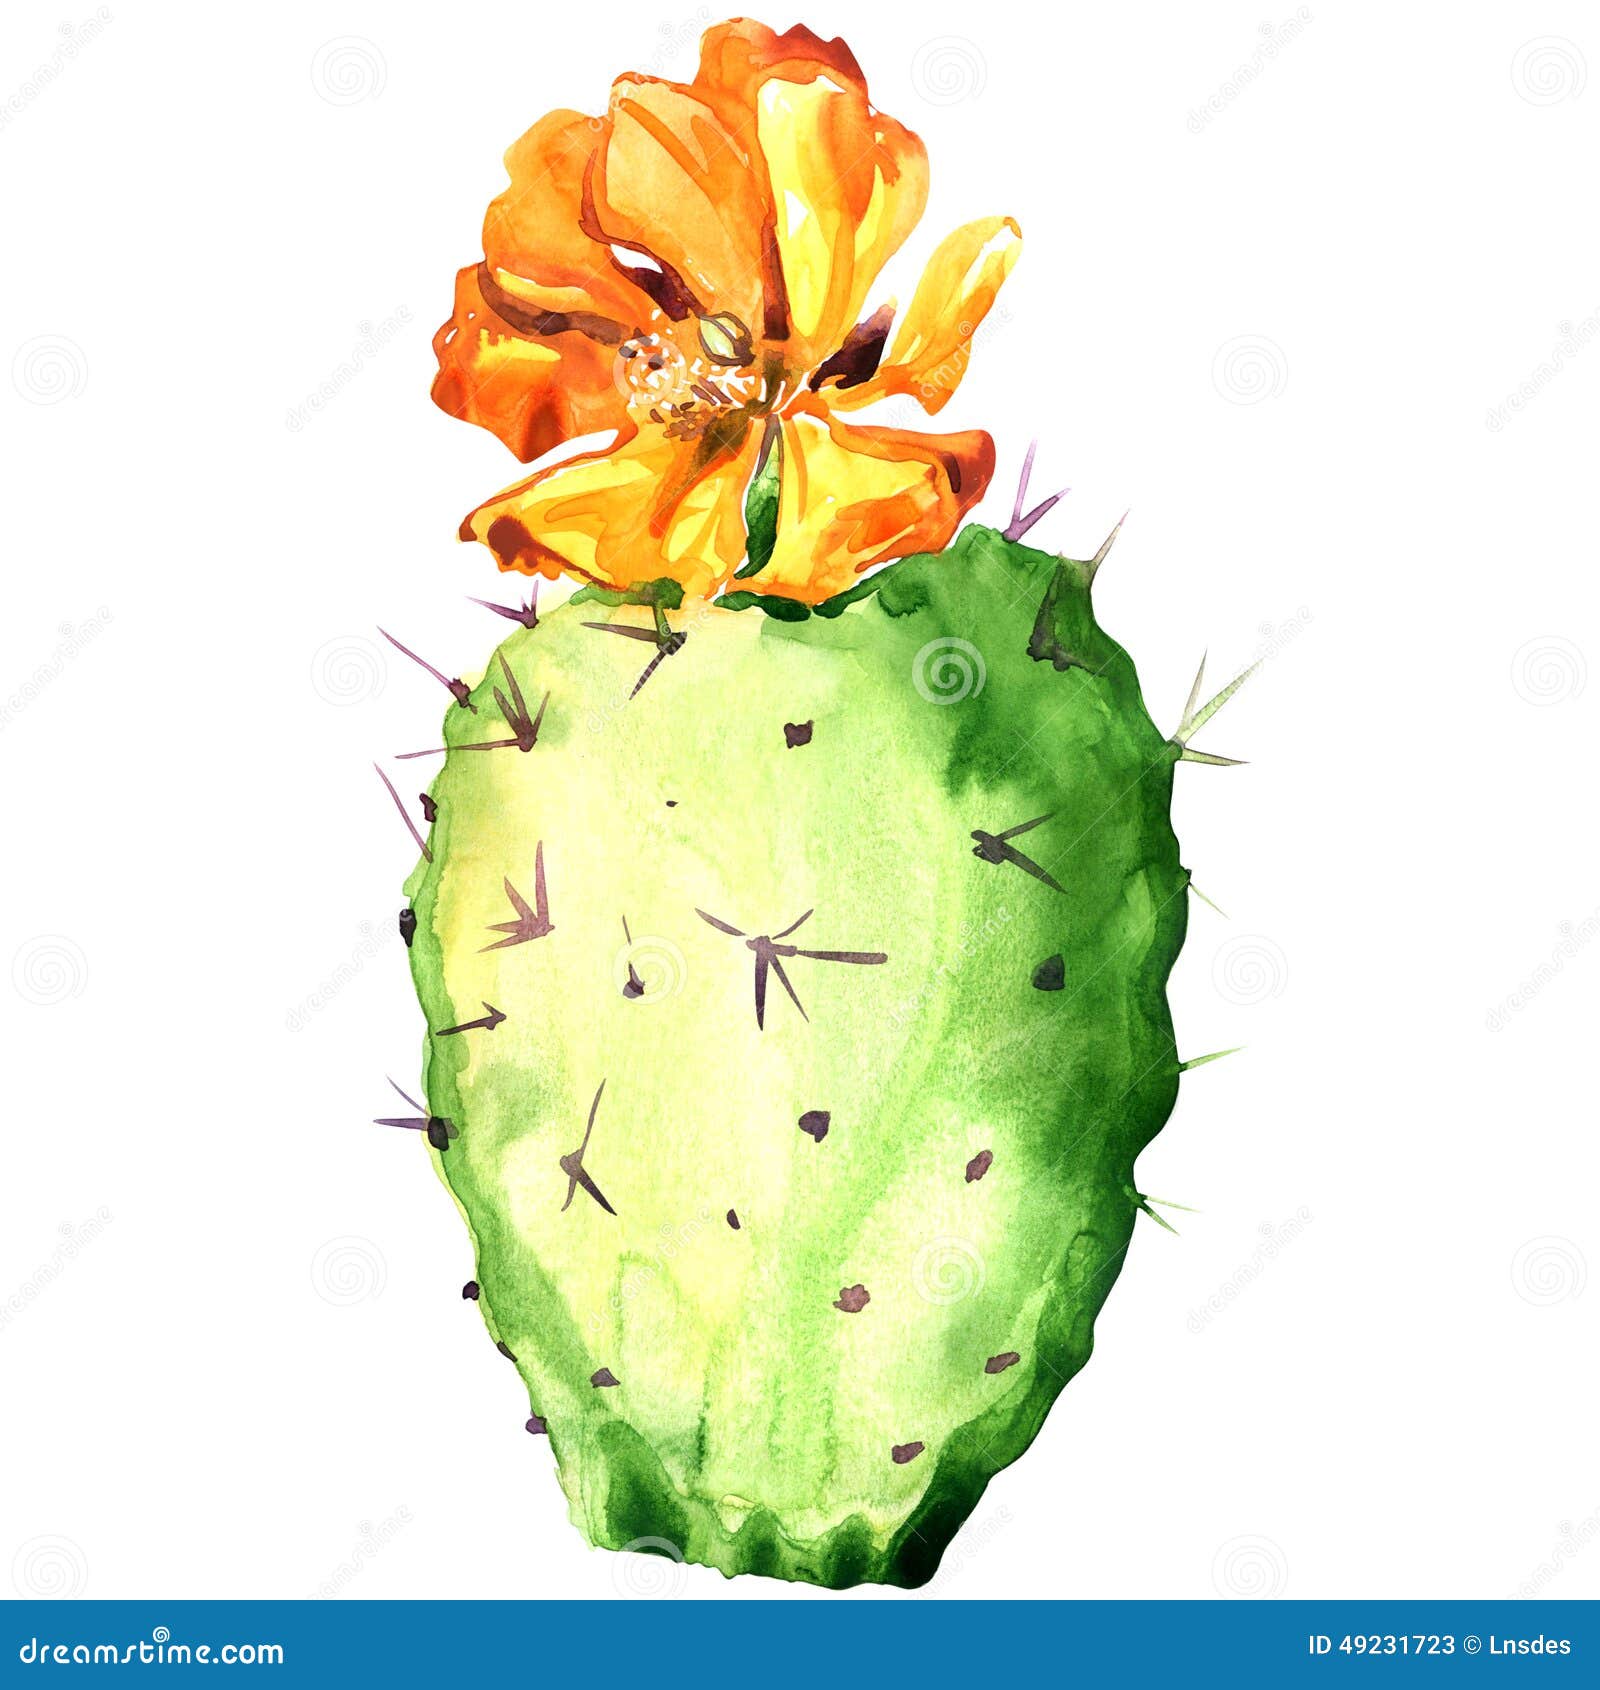 opuntia cactus with yellow flower, watercolor